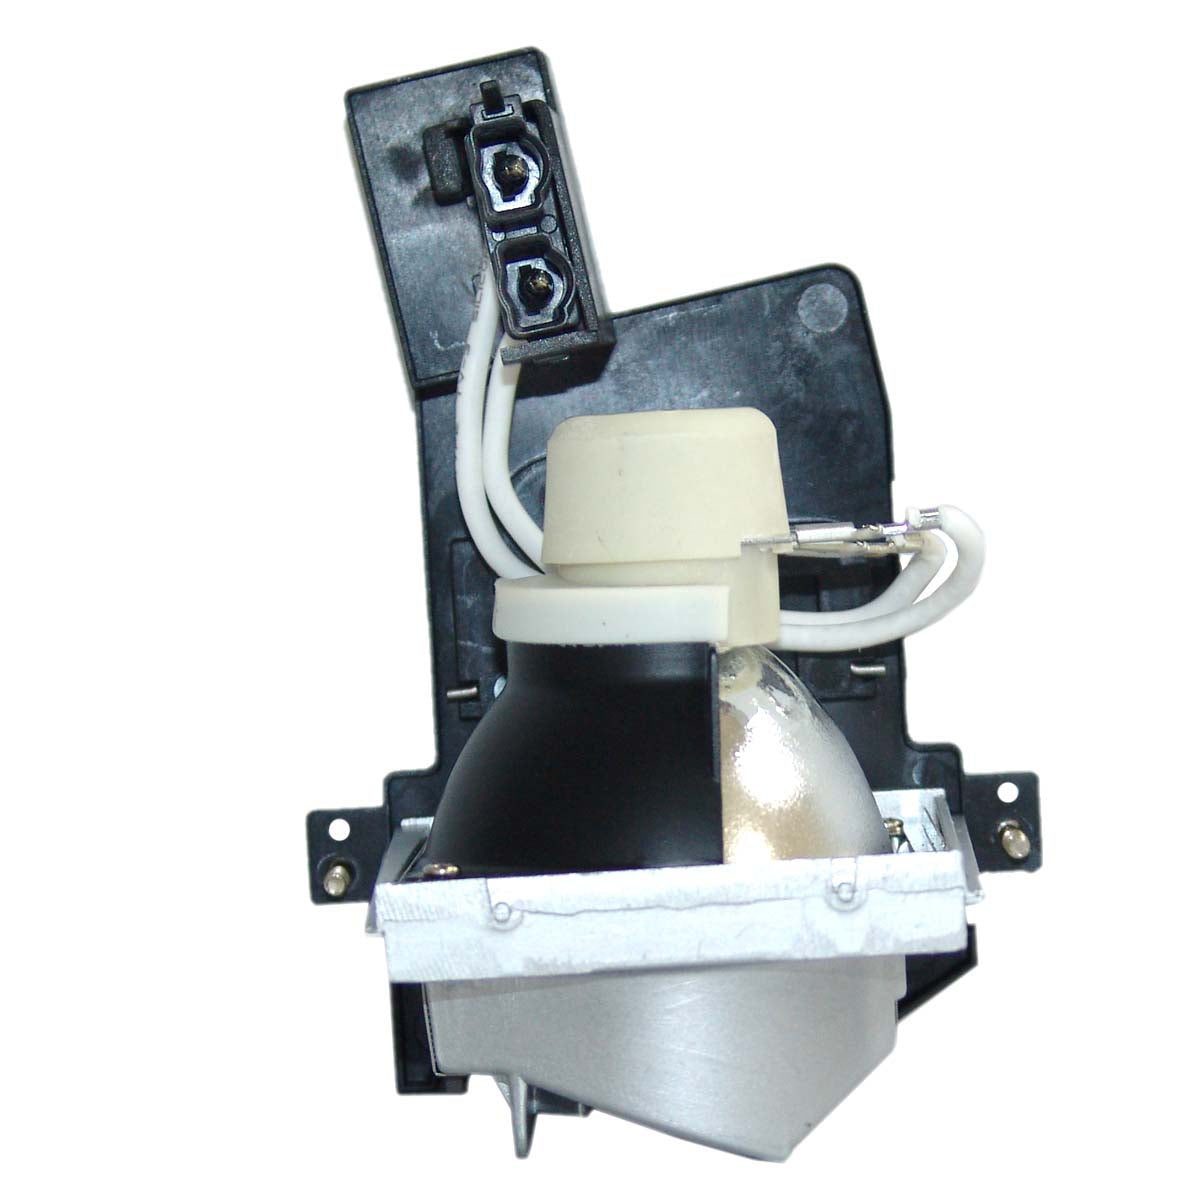 Optoma SP.87S01GC01 Compatible Projector Lamp Module